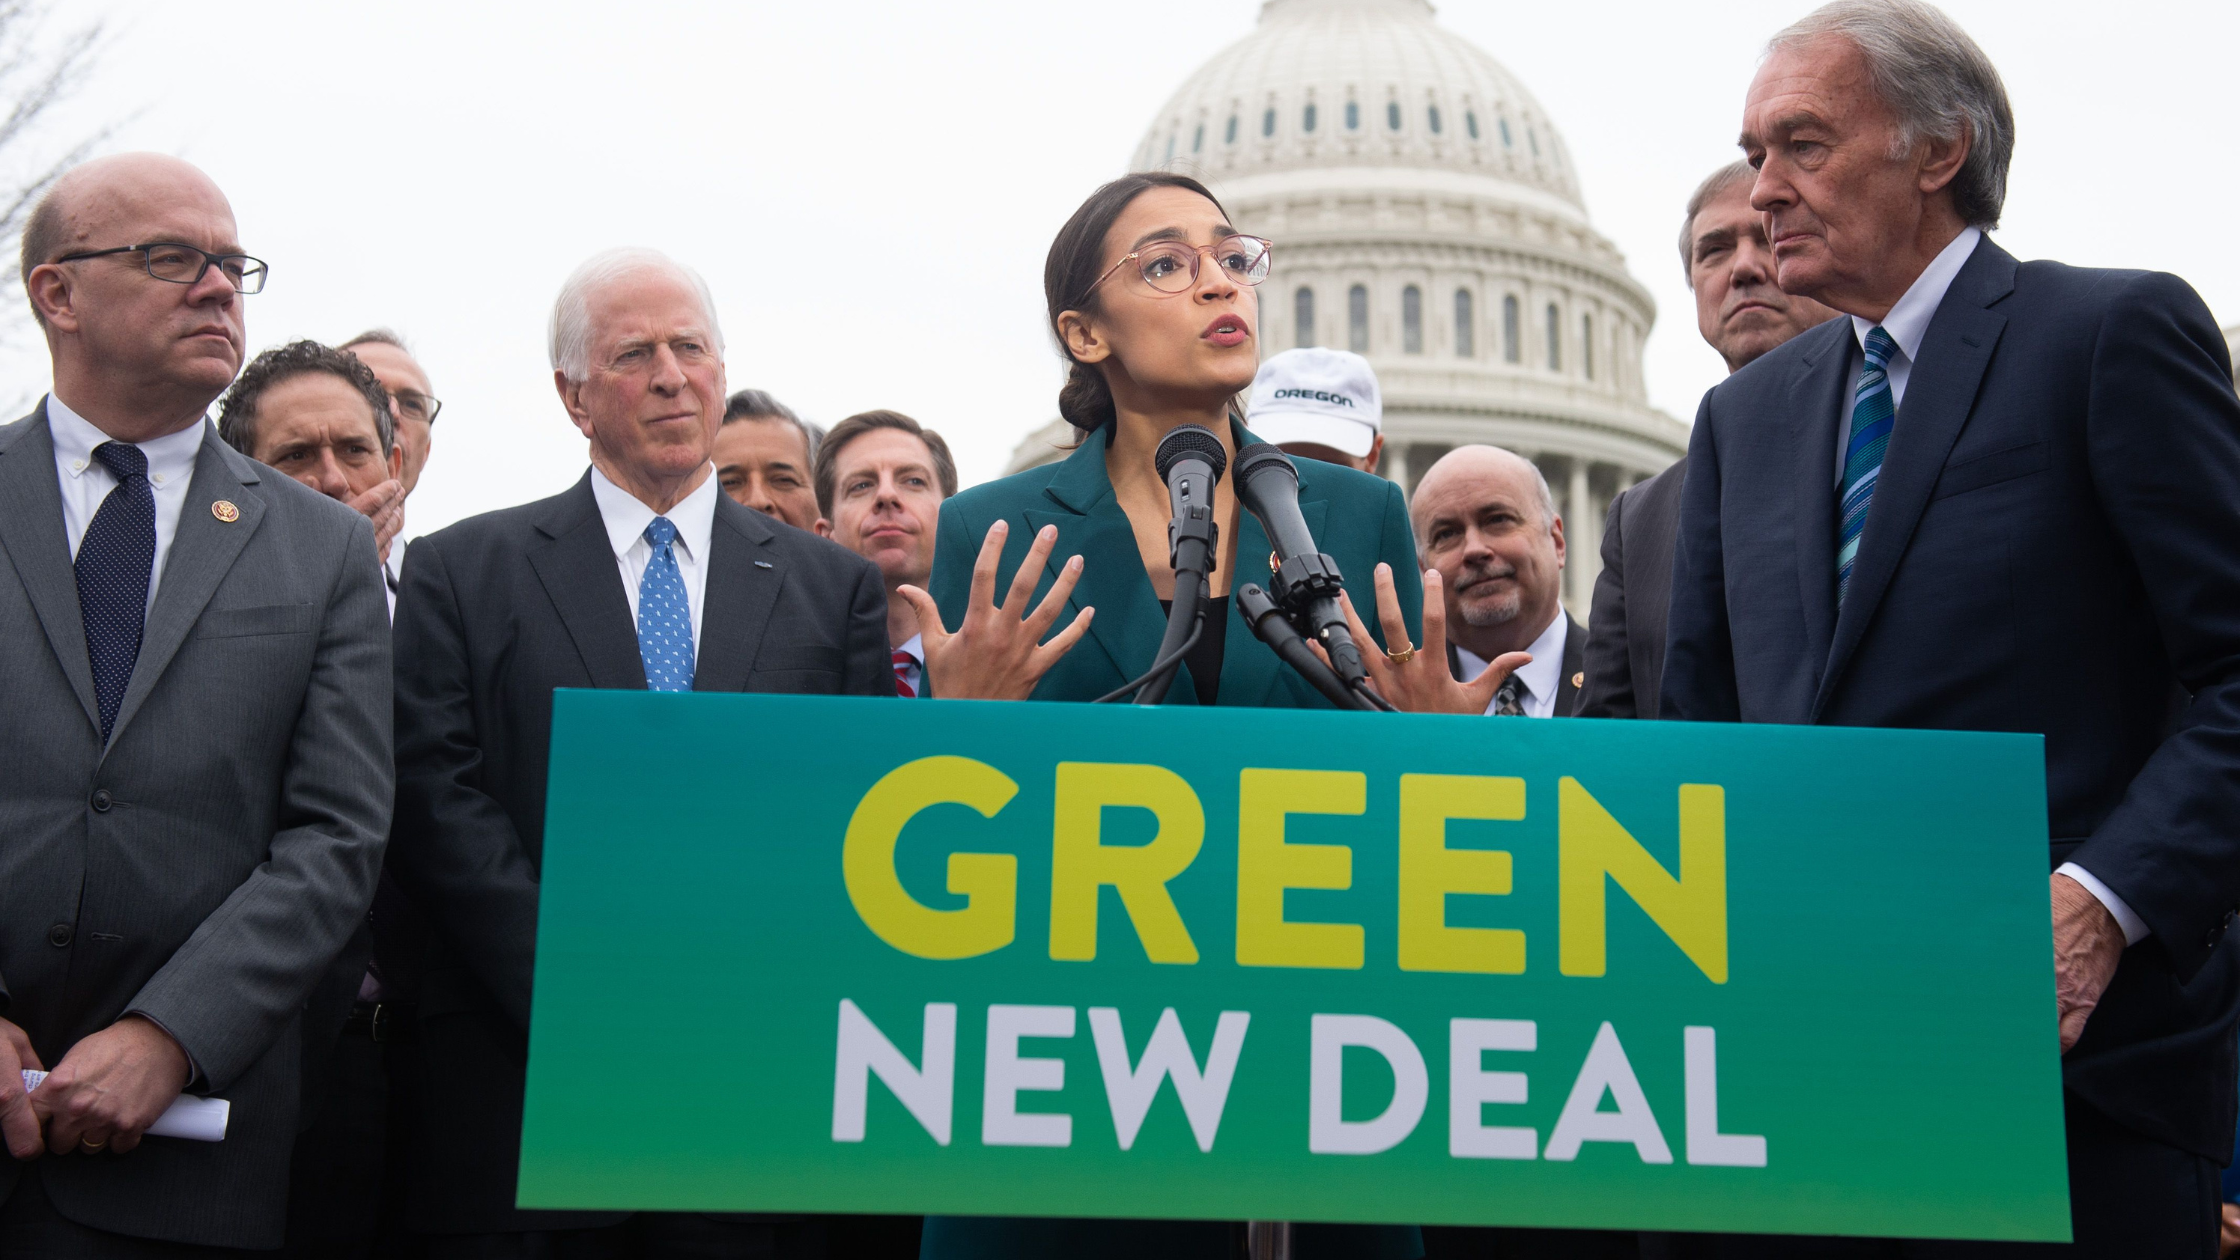 The Green New Deal: Transforming Policy for Climate Action and Economic Justice